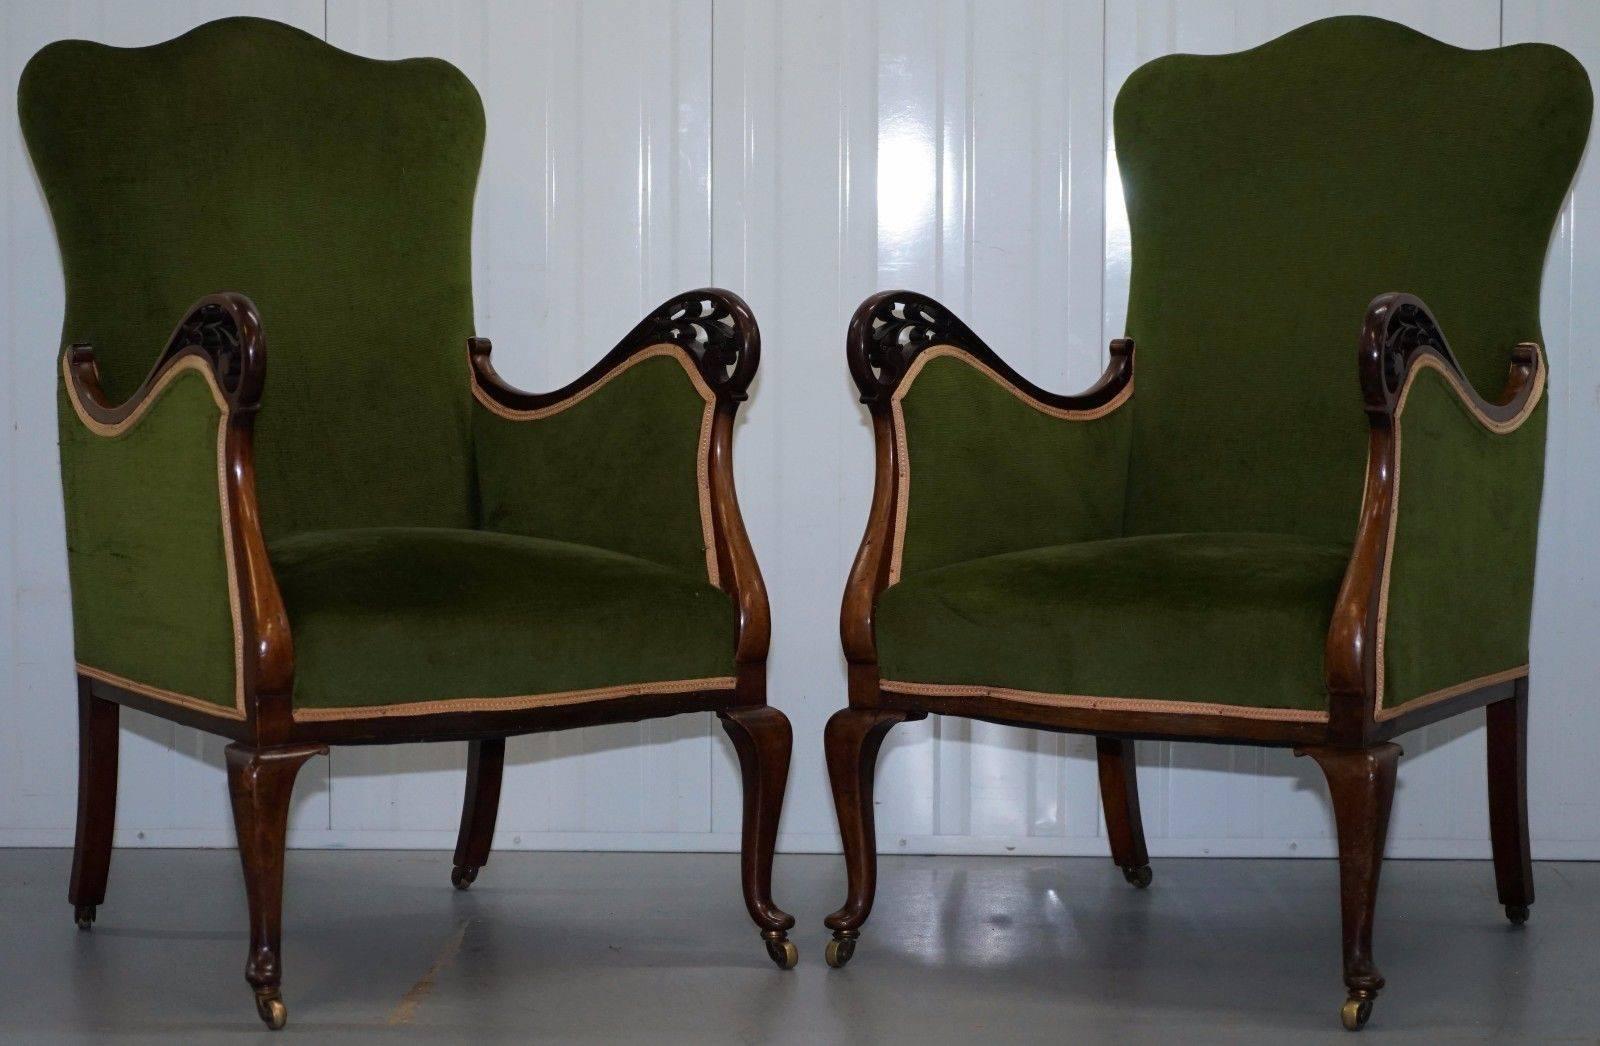 Wimbledon-Furniture

Wimbledon-Furniture is delighted to offer for sale this original fully stamped Cornelius V Smith London Victorian Cabinet maker circa 1860 mahogany framed with green velvet upholstery three piece suite

Please note the delivery